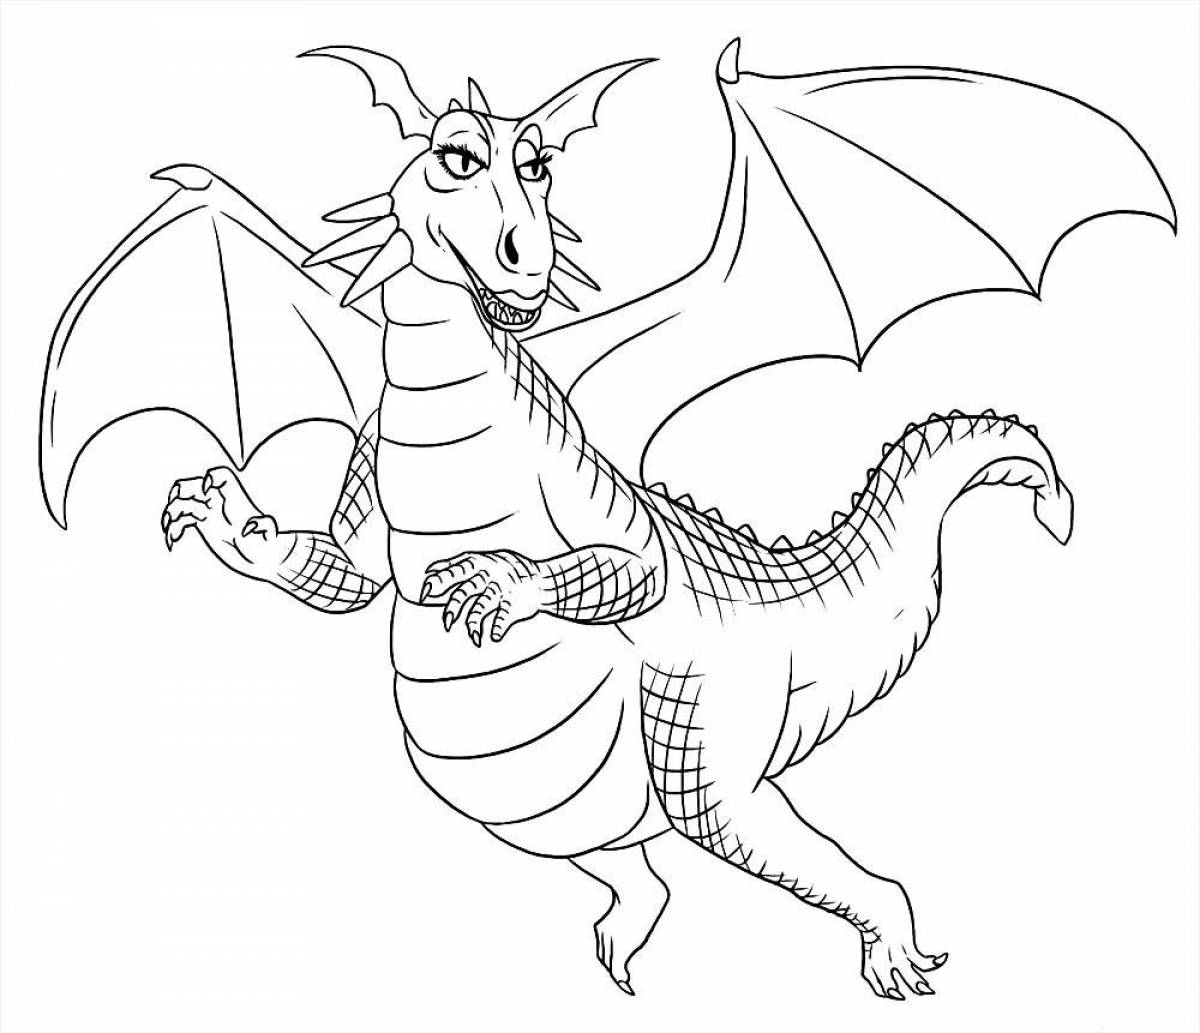 Charming dragon coloring book for kids